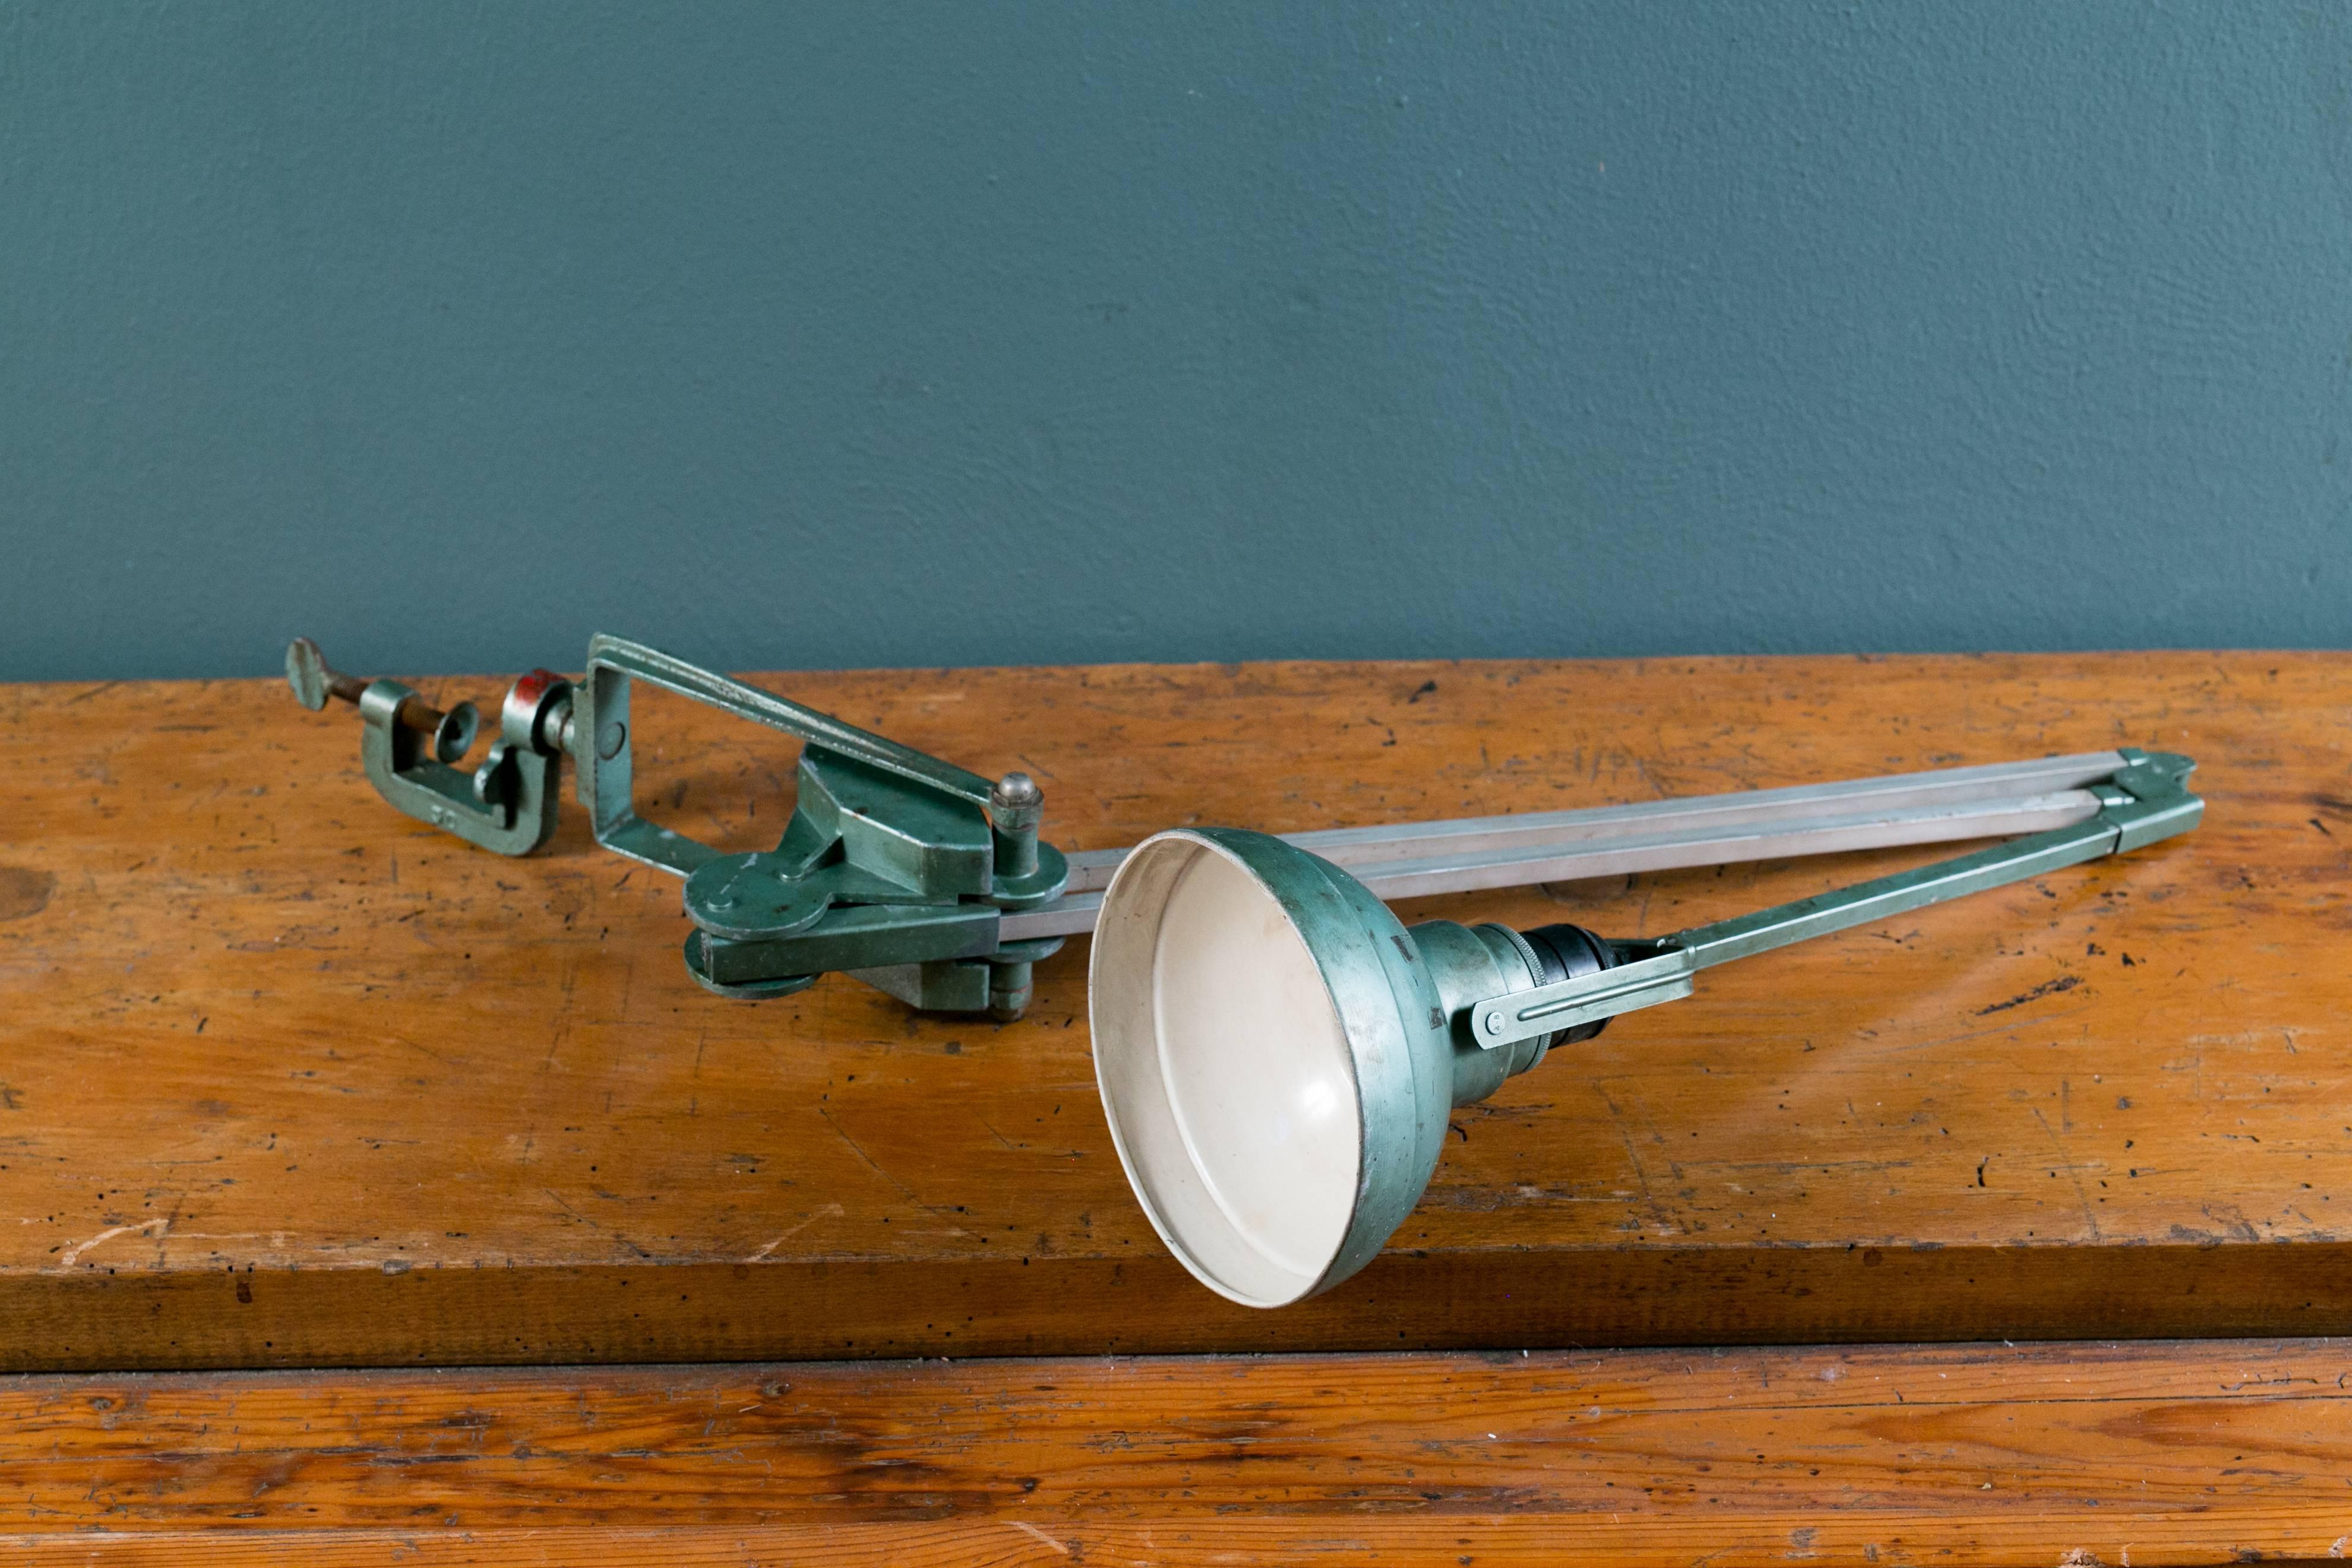 Erpe industrial drafting lamp: metallic green mechanist or drafting table lamp manufactured circa 1940 by the Belgian company Erpe. Supported by an articulated arm attached to desk by a screw clamp. Neck hinged to weighted swinging base. Shade turns